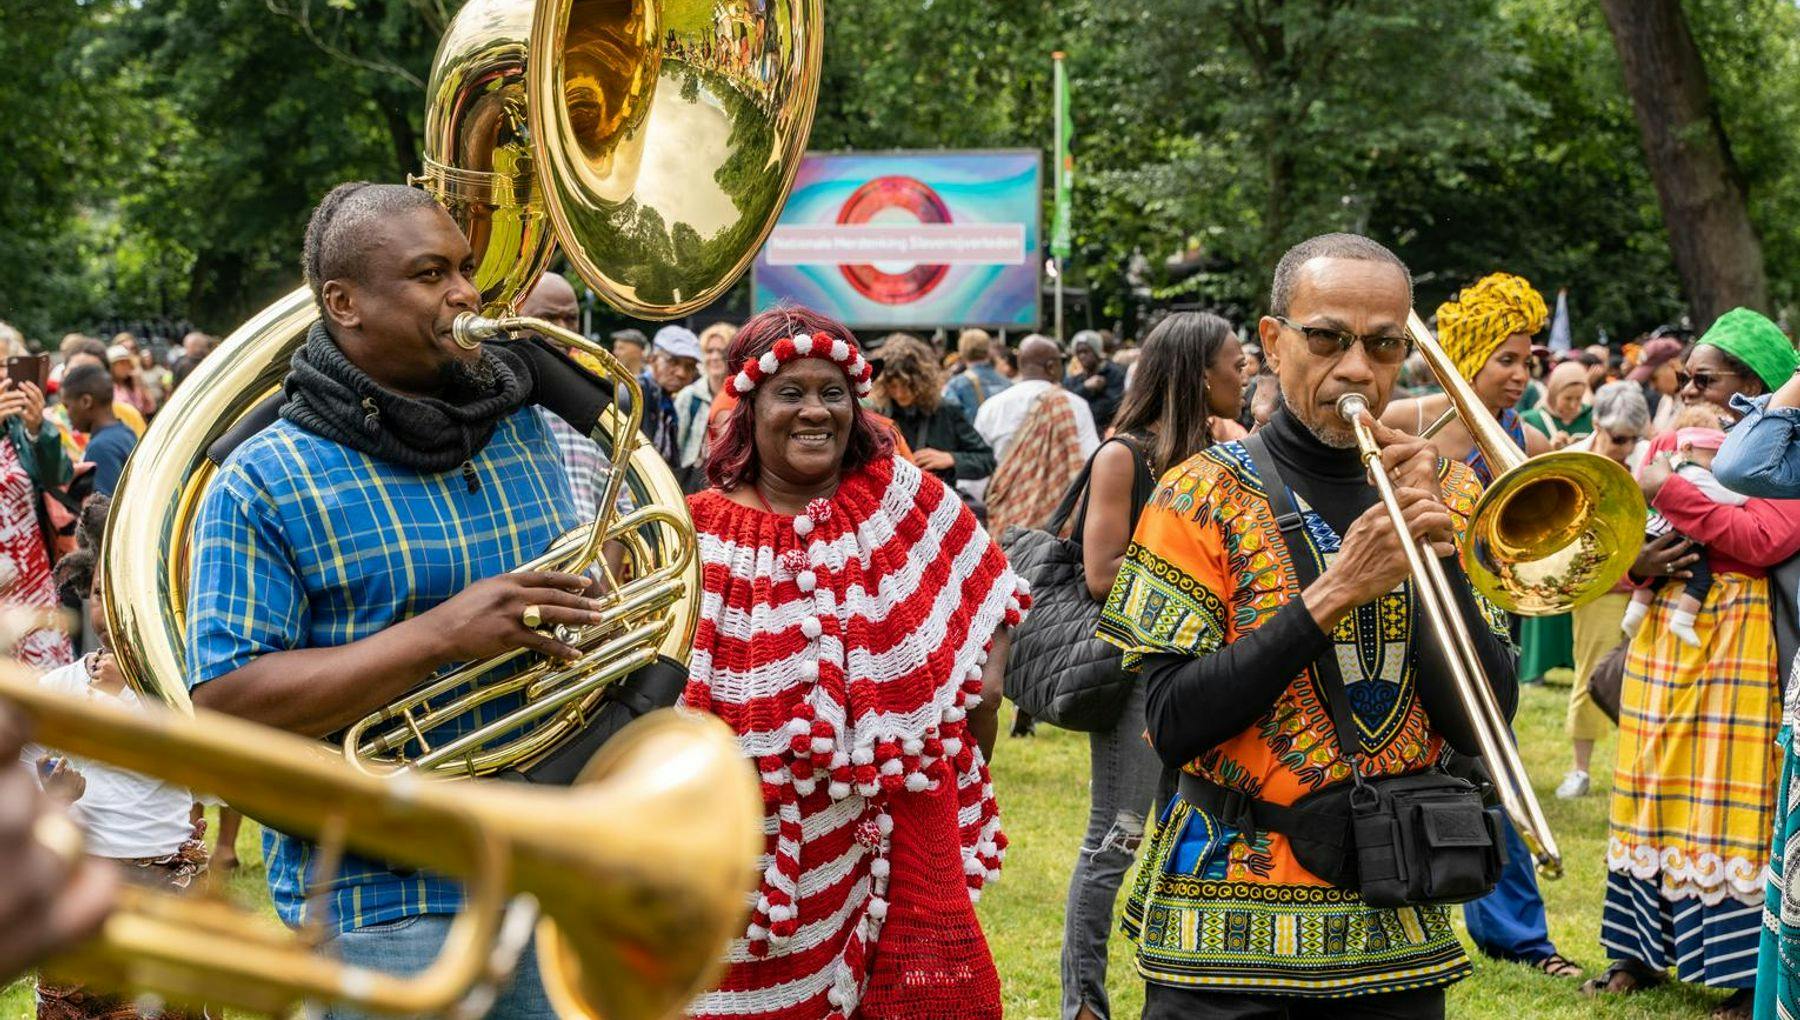 Musicians playing the trombone during Keti Koti Festival 2022 in the Oosterpark.